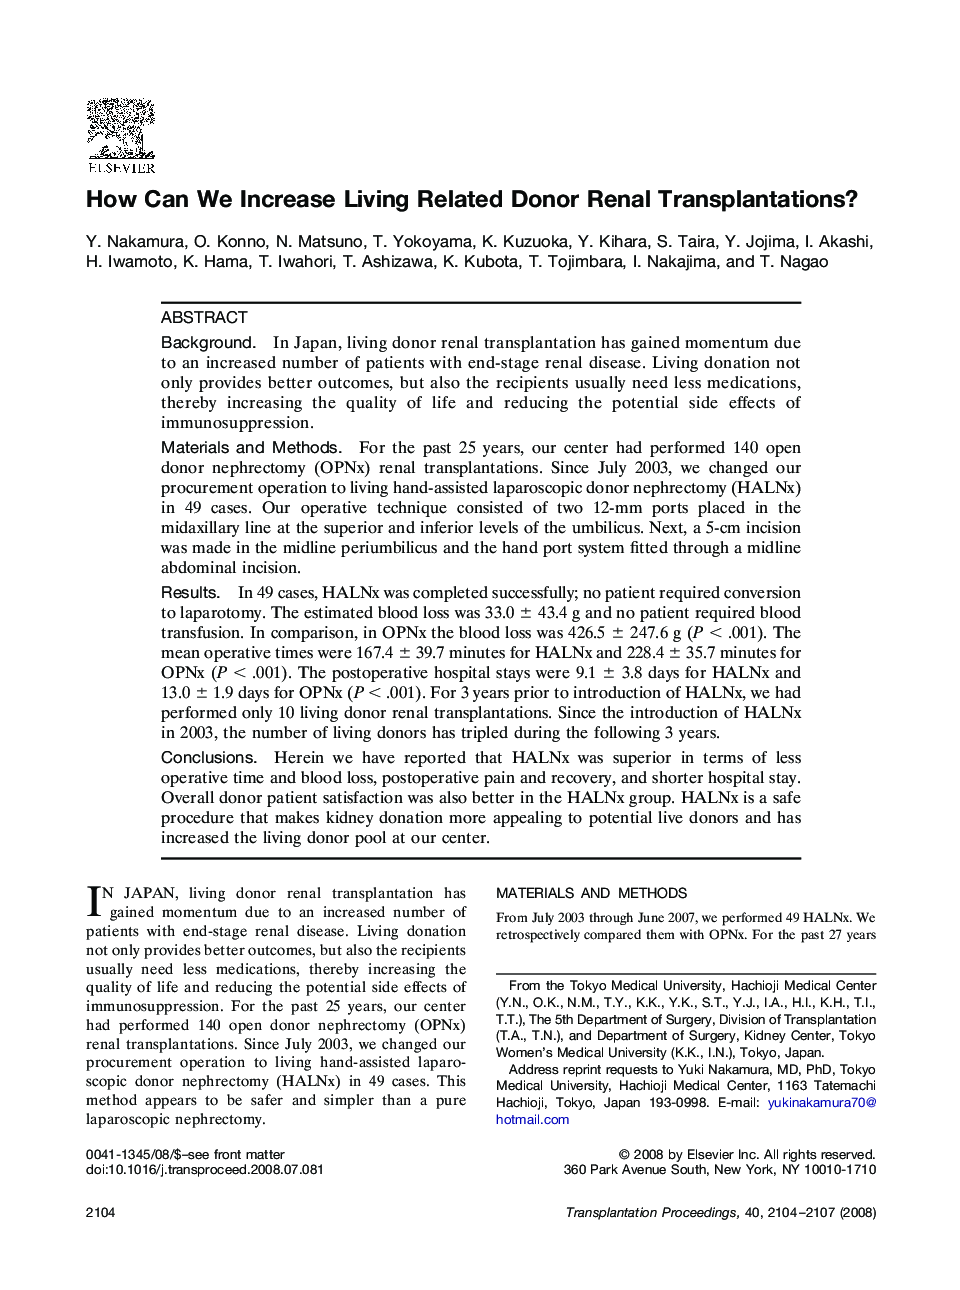 How Can We Increase Living Related Donor Renal Transplantations?